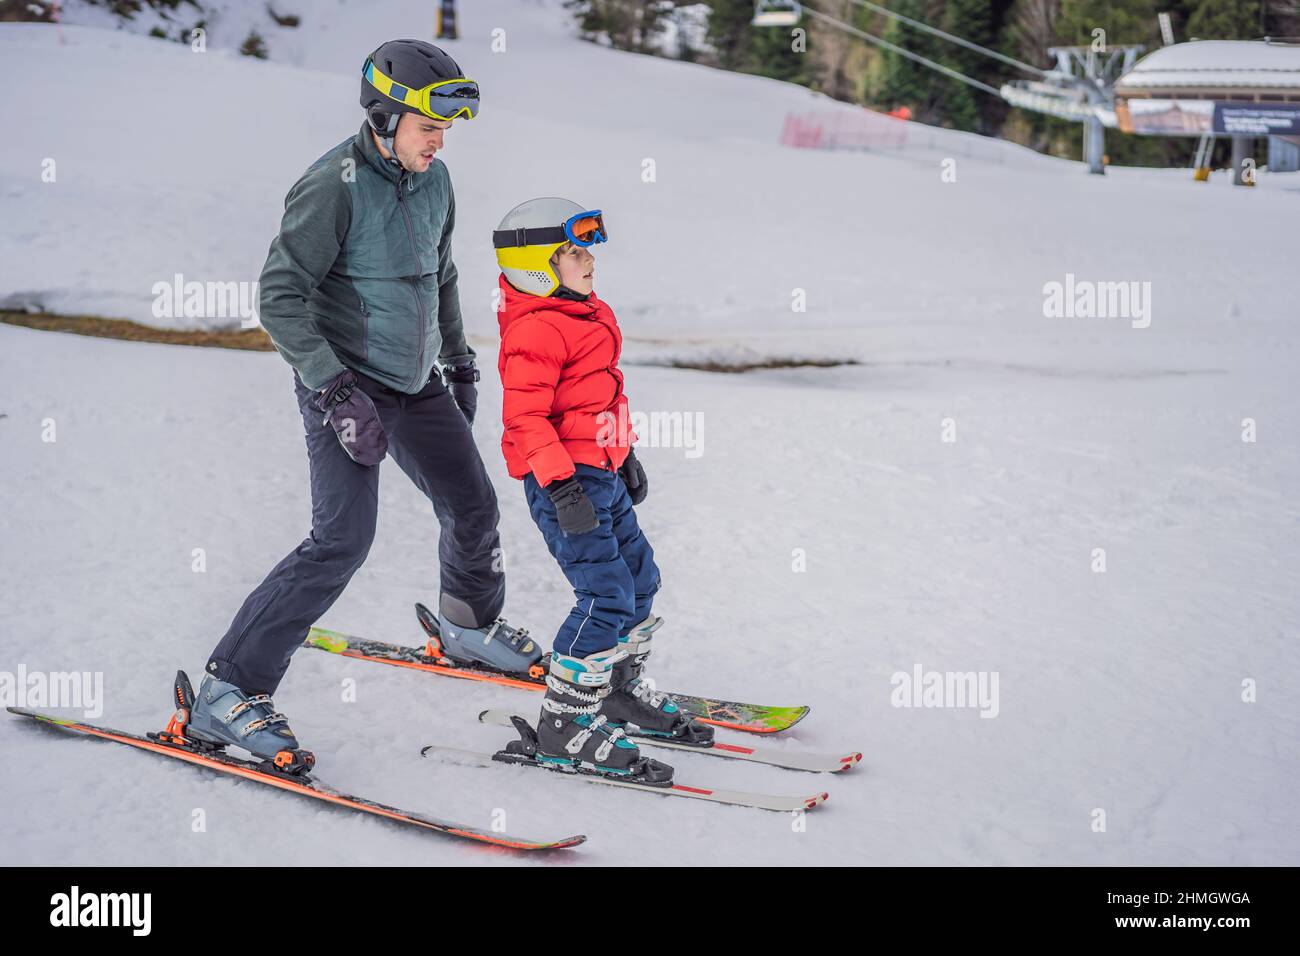 Boy learning to ski, training and listening to his ski instructor on the slope in winter Stock Photo